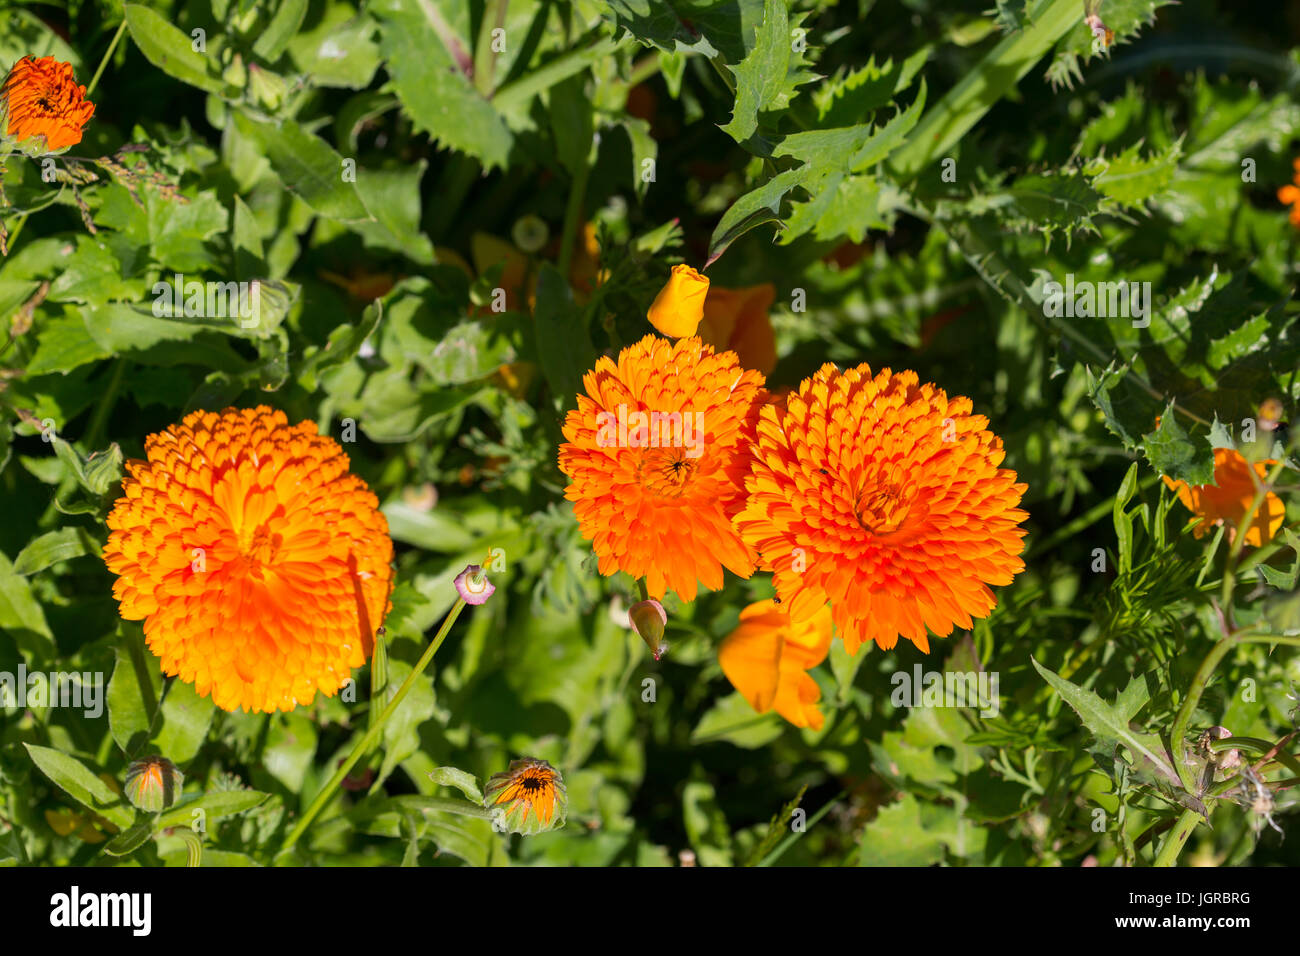 Marigolds ,flowers growing and blooming  on 'Jesus Green' cambridge. Stock Photo